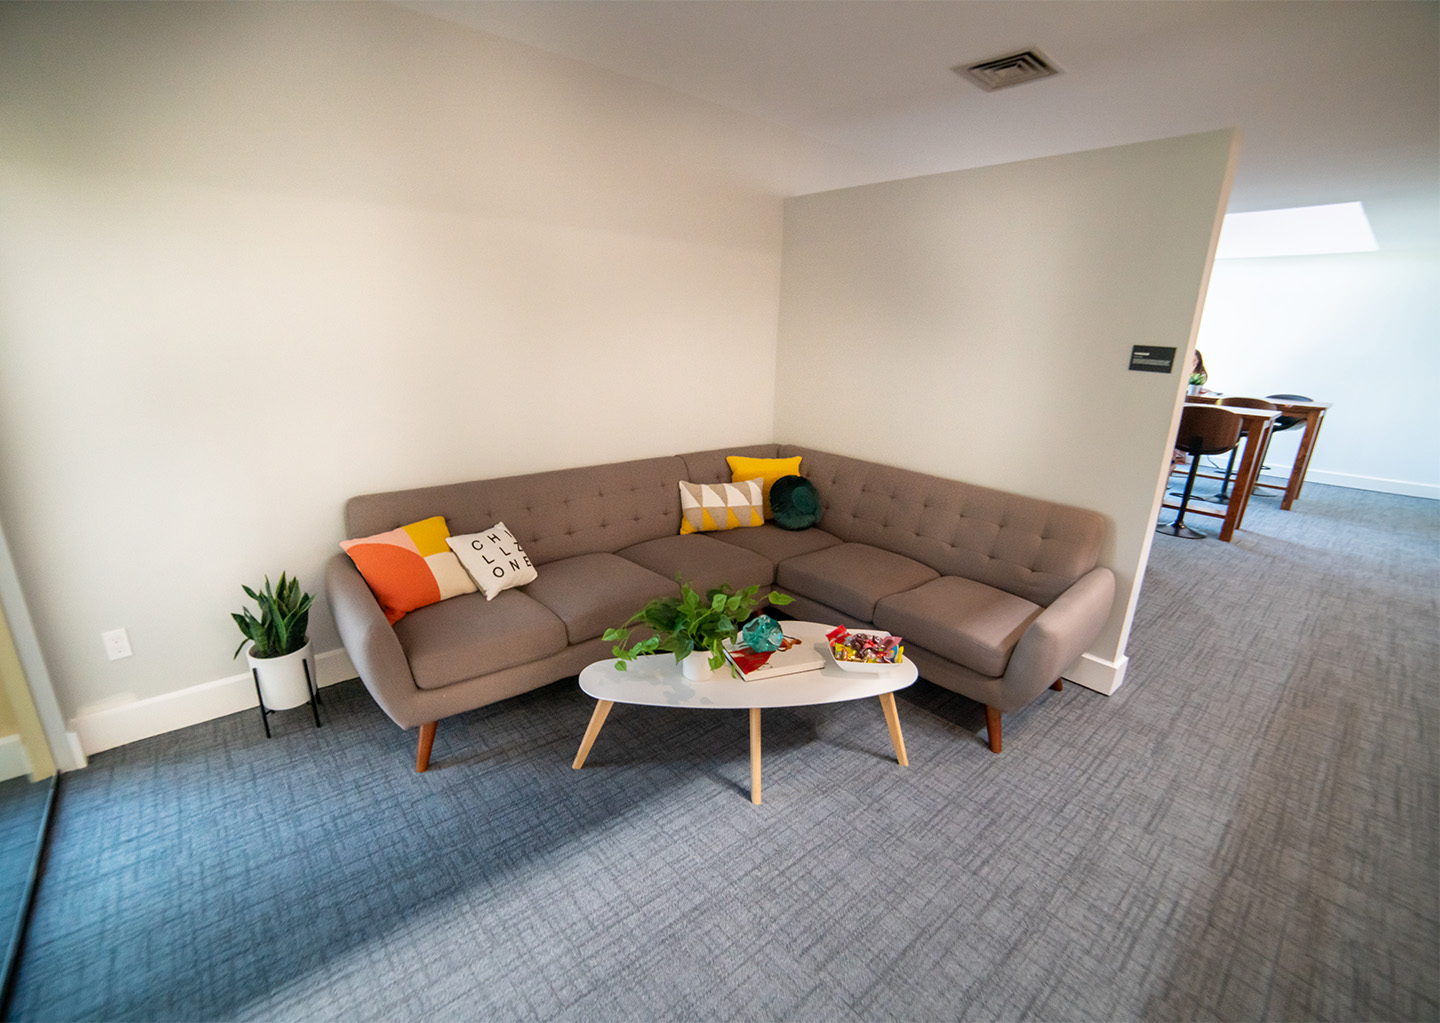 Open office place in Rebel HQ featuring an "L" shaped sectional sofa